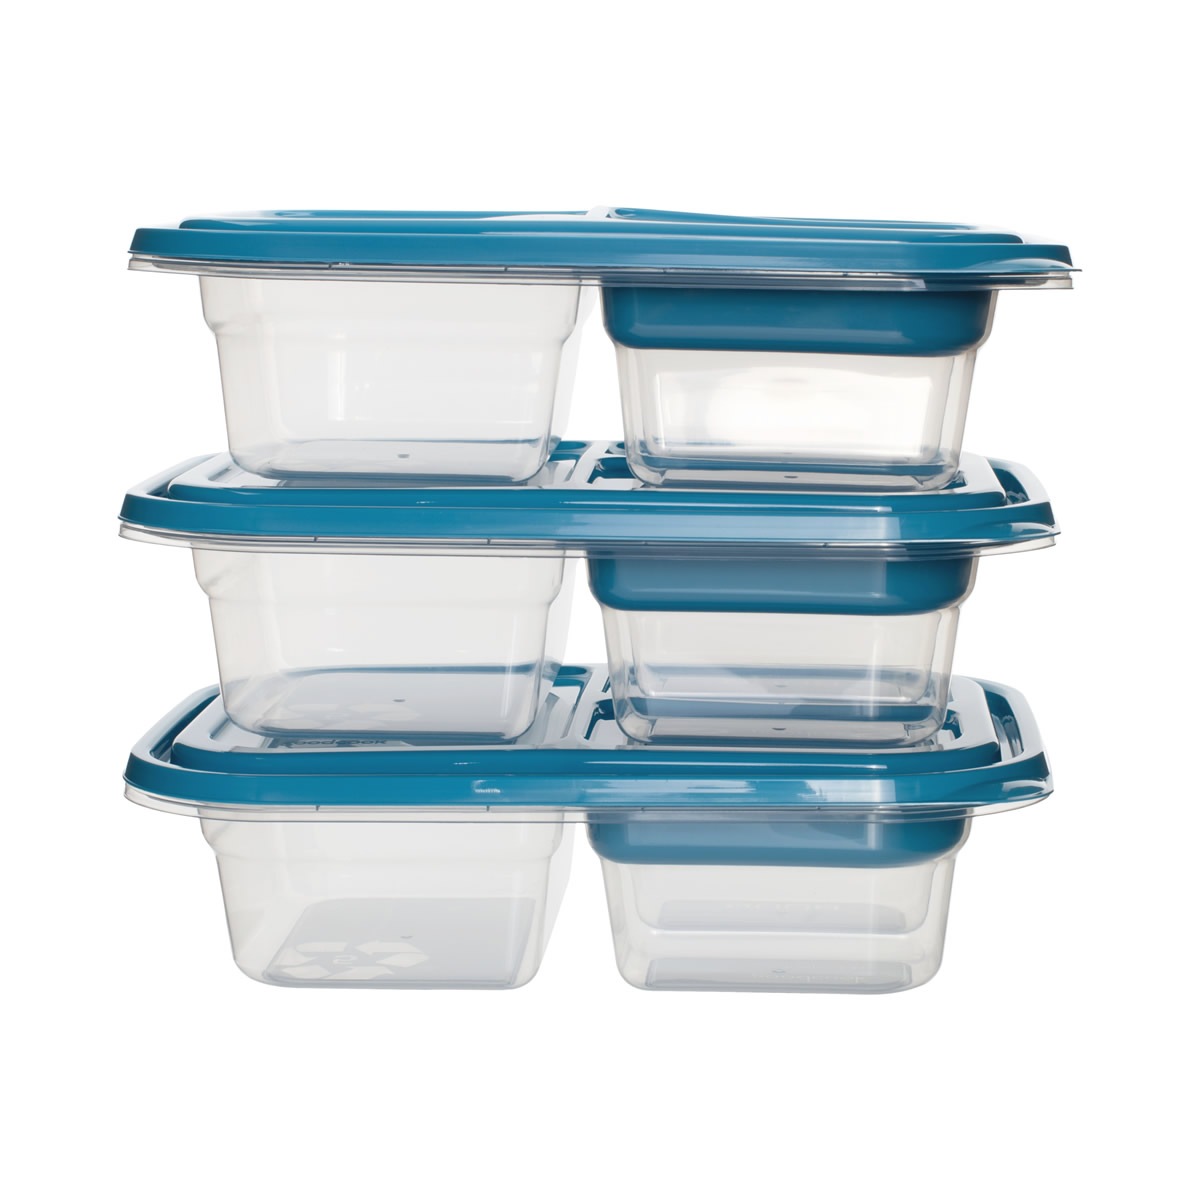 [5-Pack, 36 Oz]Glass Meal Prep Containers 3 Compartment with Lids, BPA-Free  Food Storage Glass Lunch Containers Bento Box for Microwave, Oven